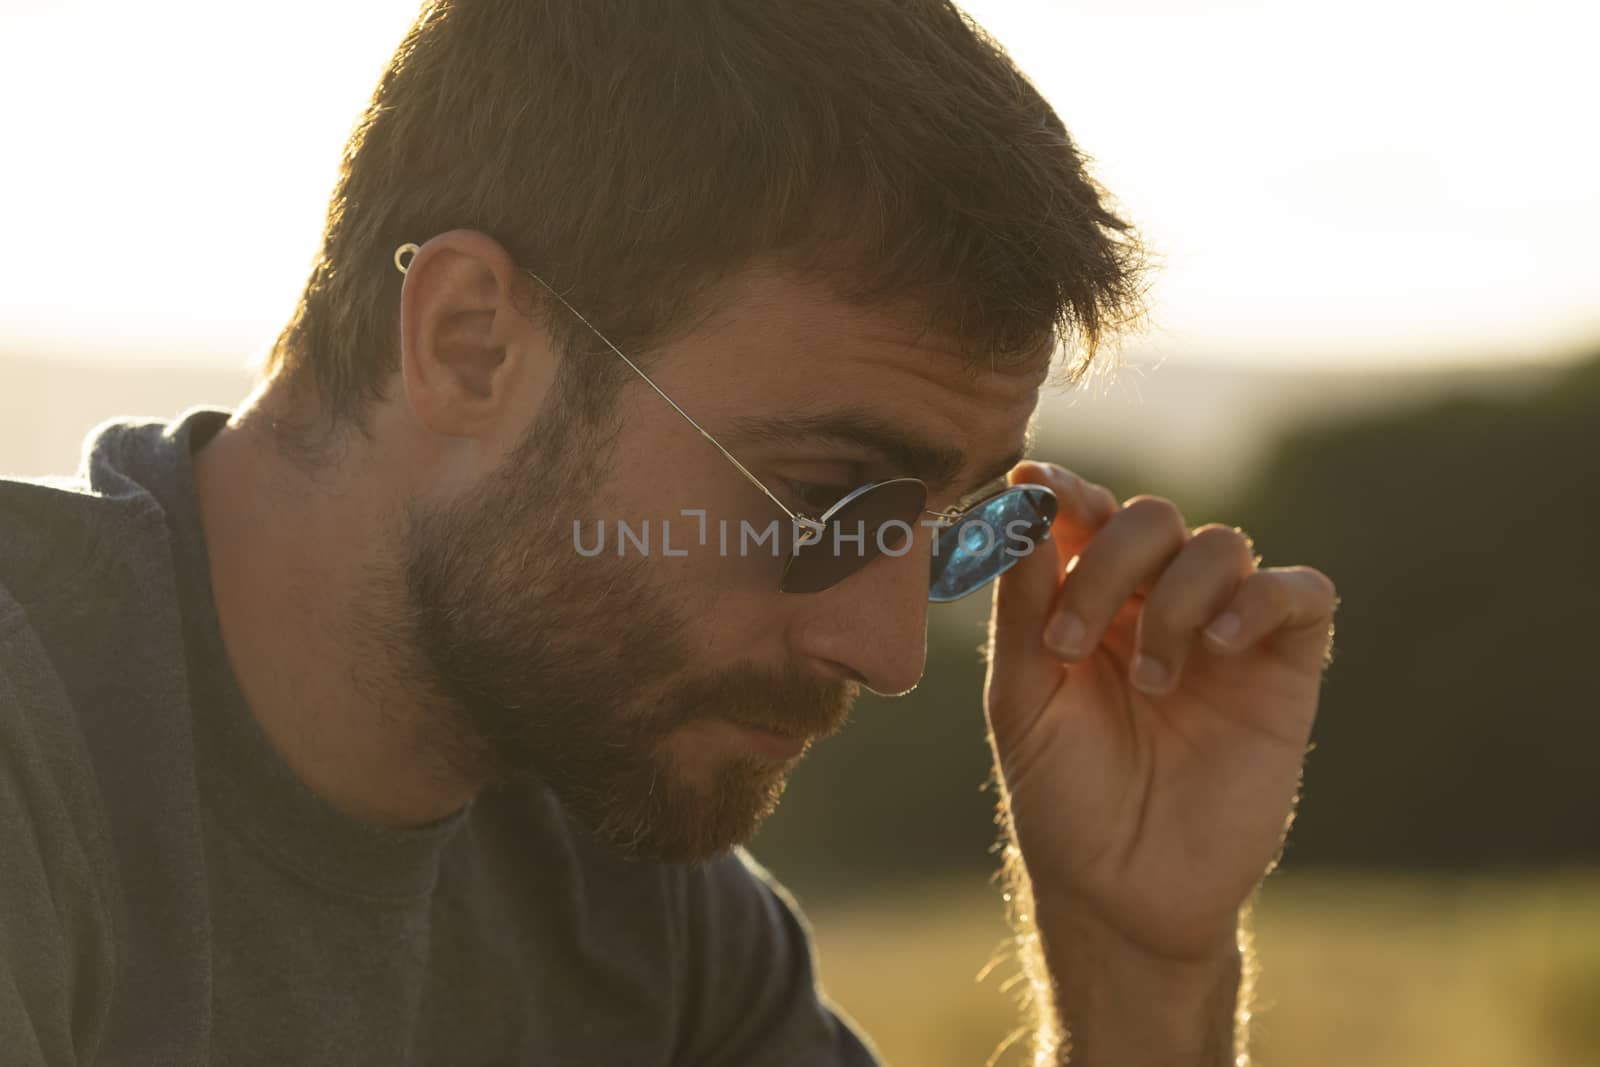 A young man puts on his sunglasses to see better at sunset.